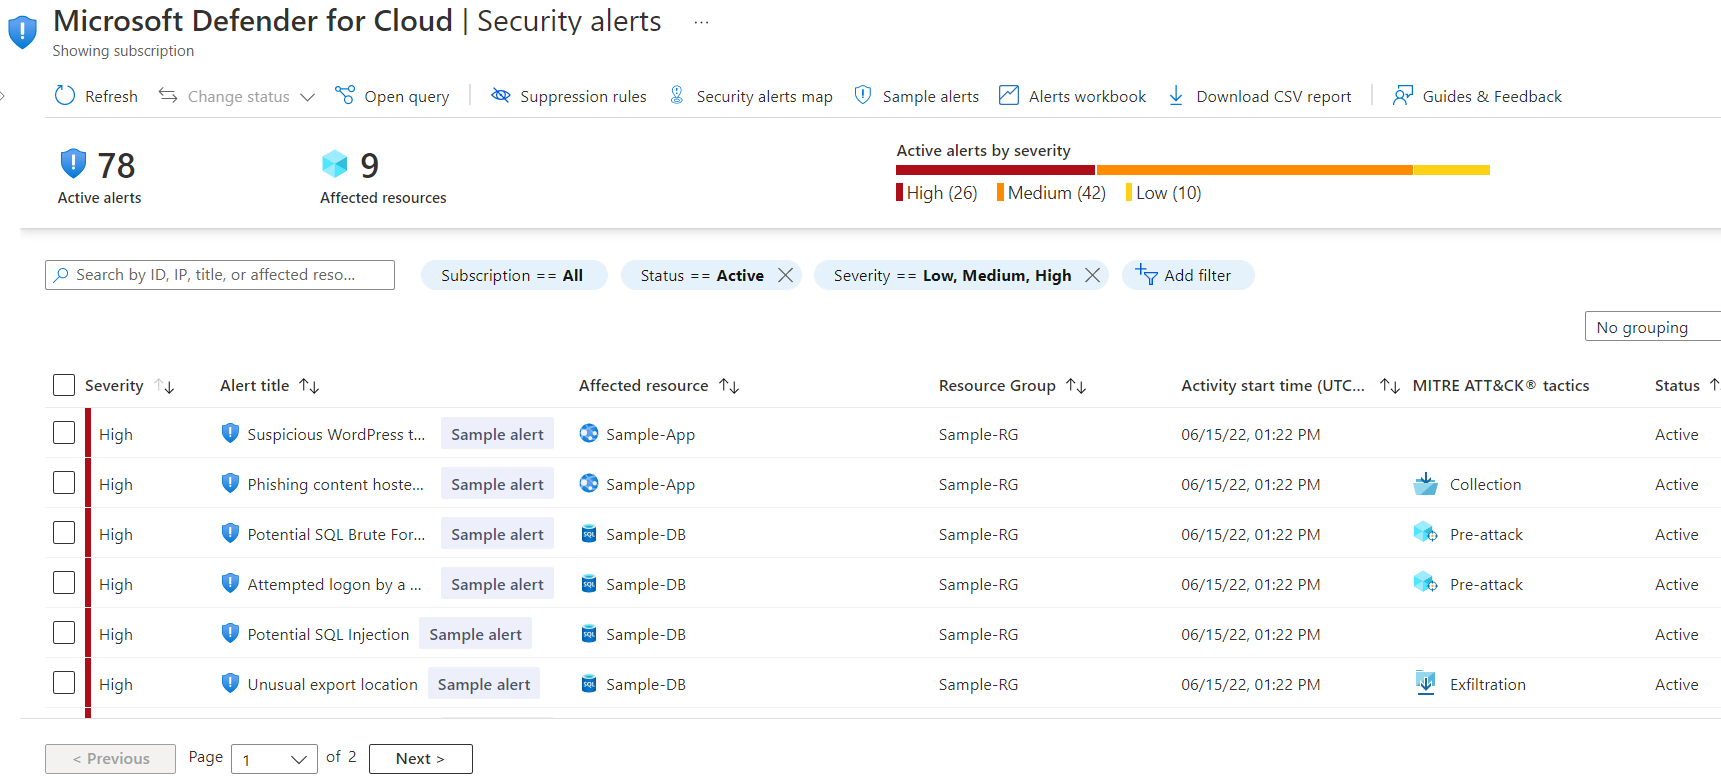 Screenshot of the Defender for Cloud Alerts list page.